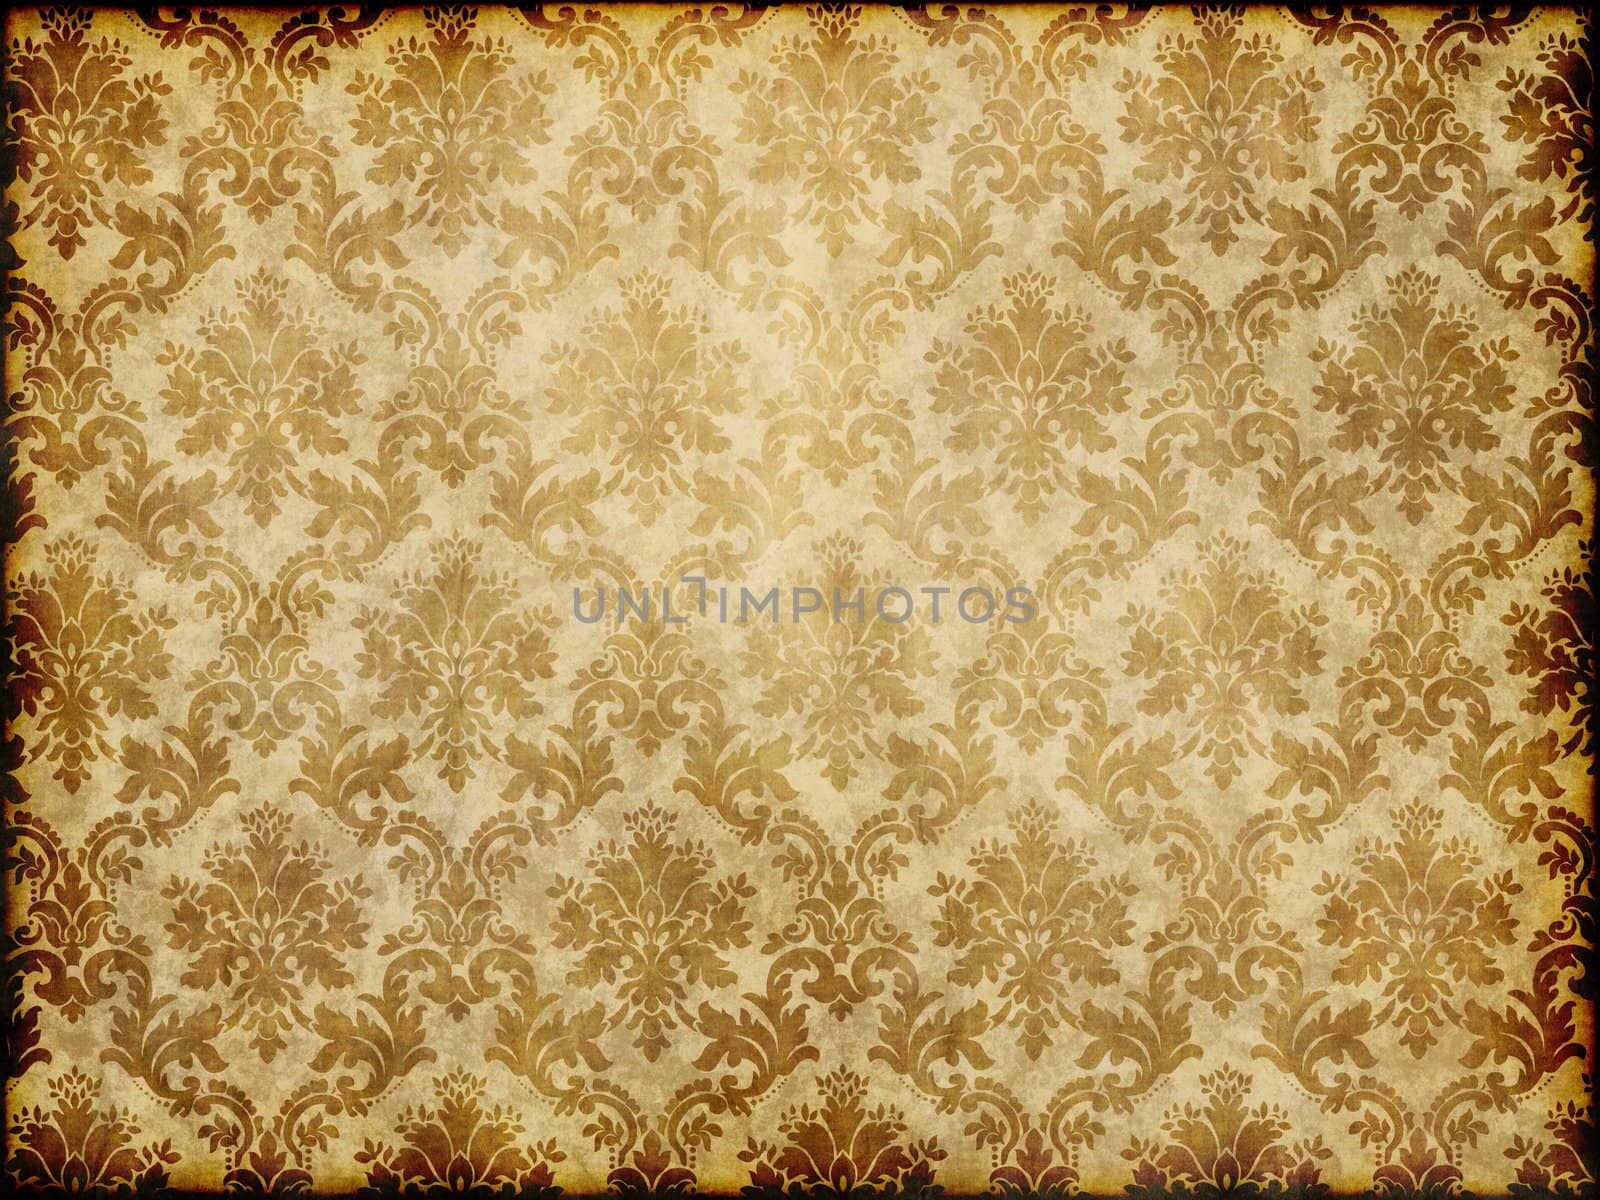 vintage damask wallpaper by clearviewstock